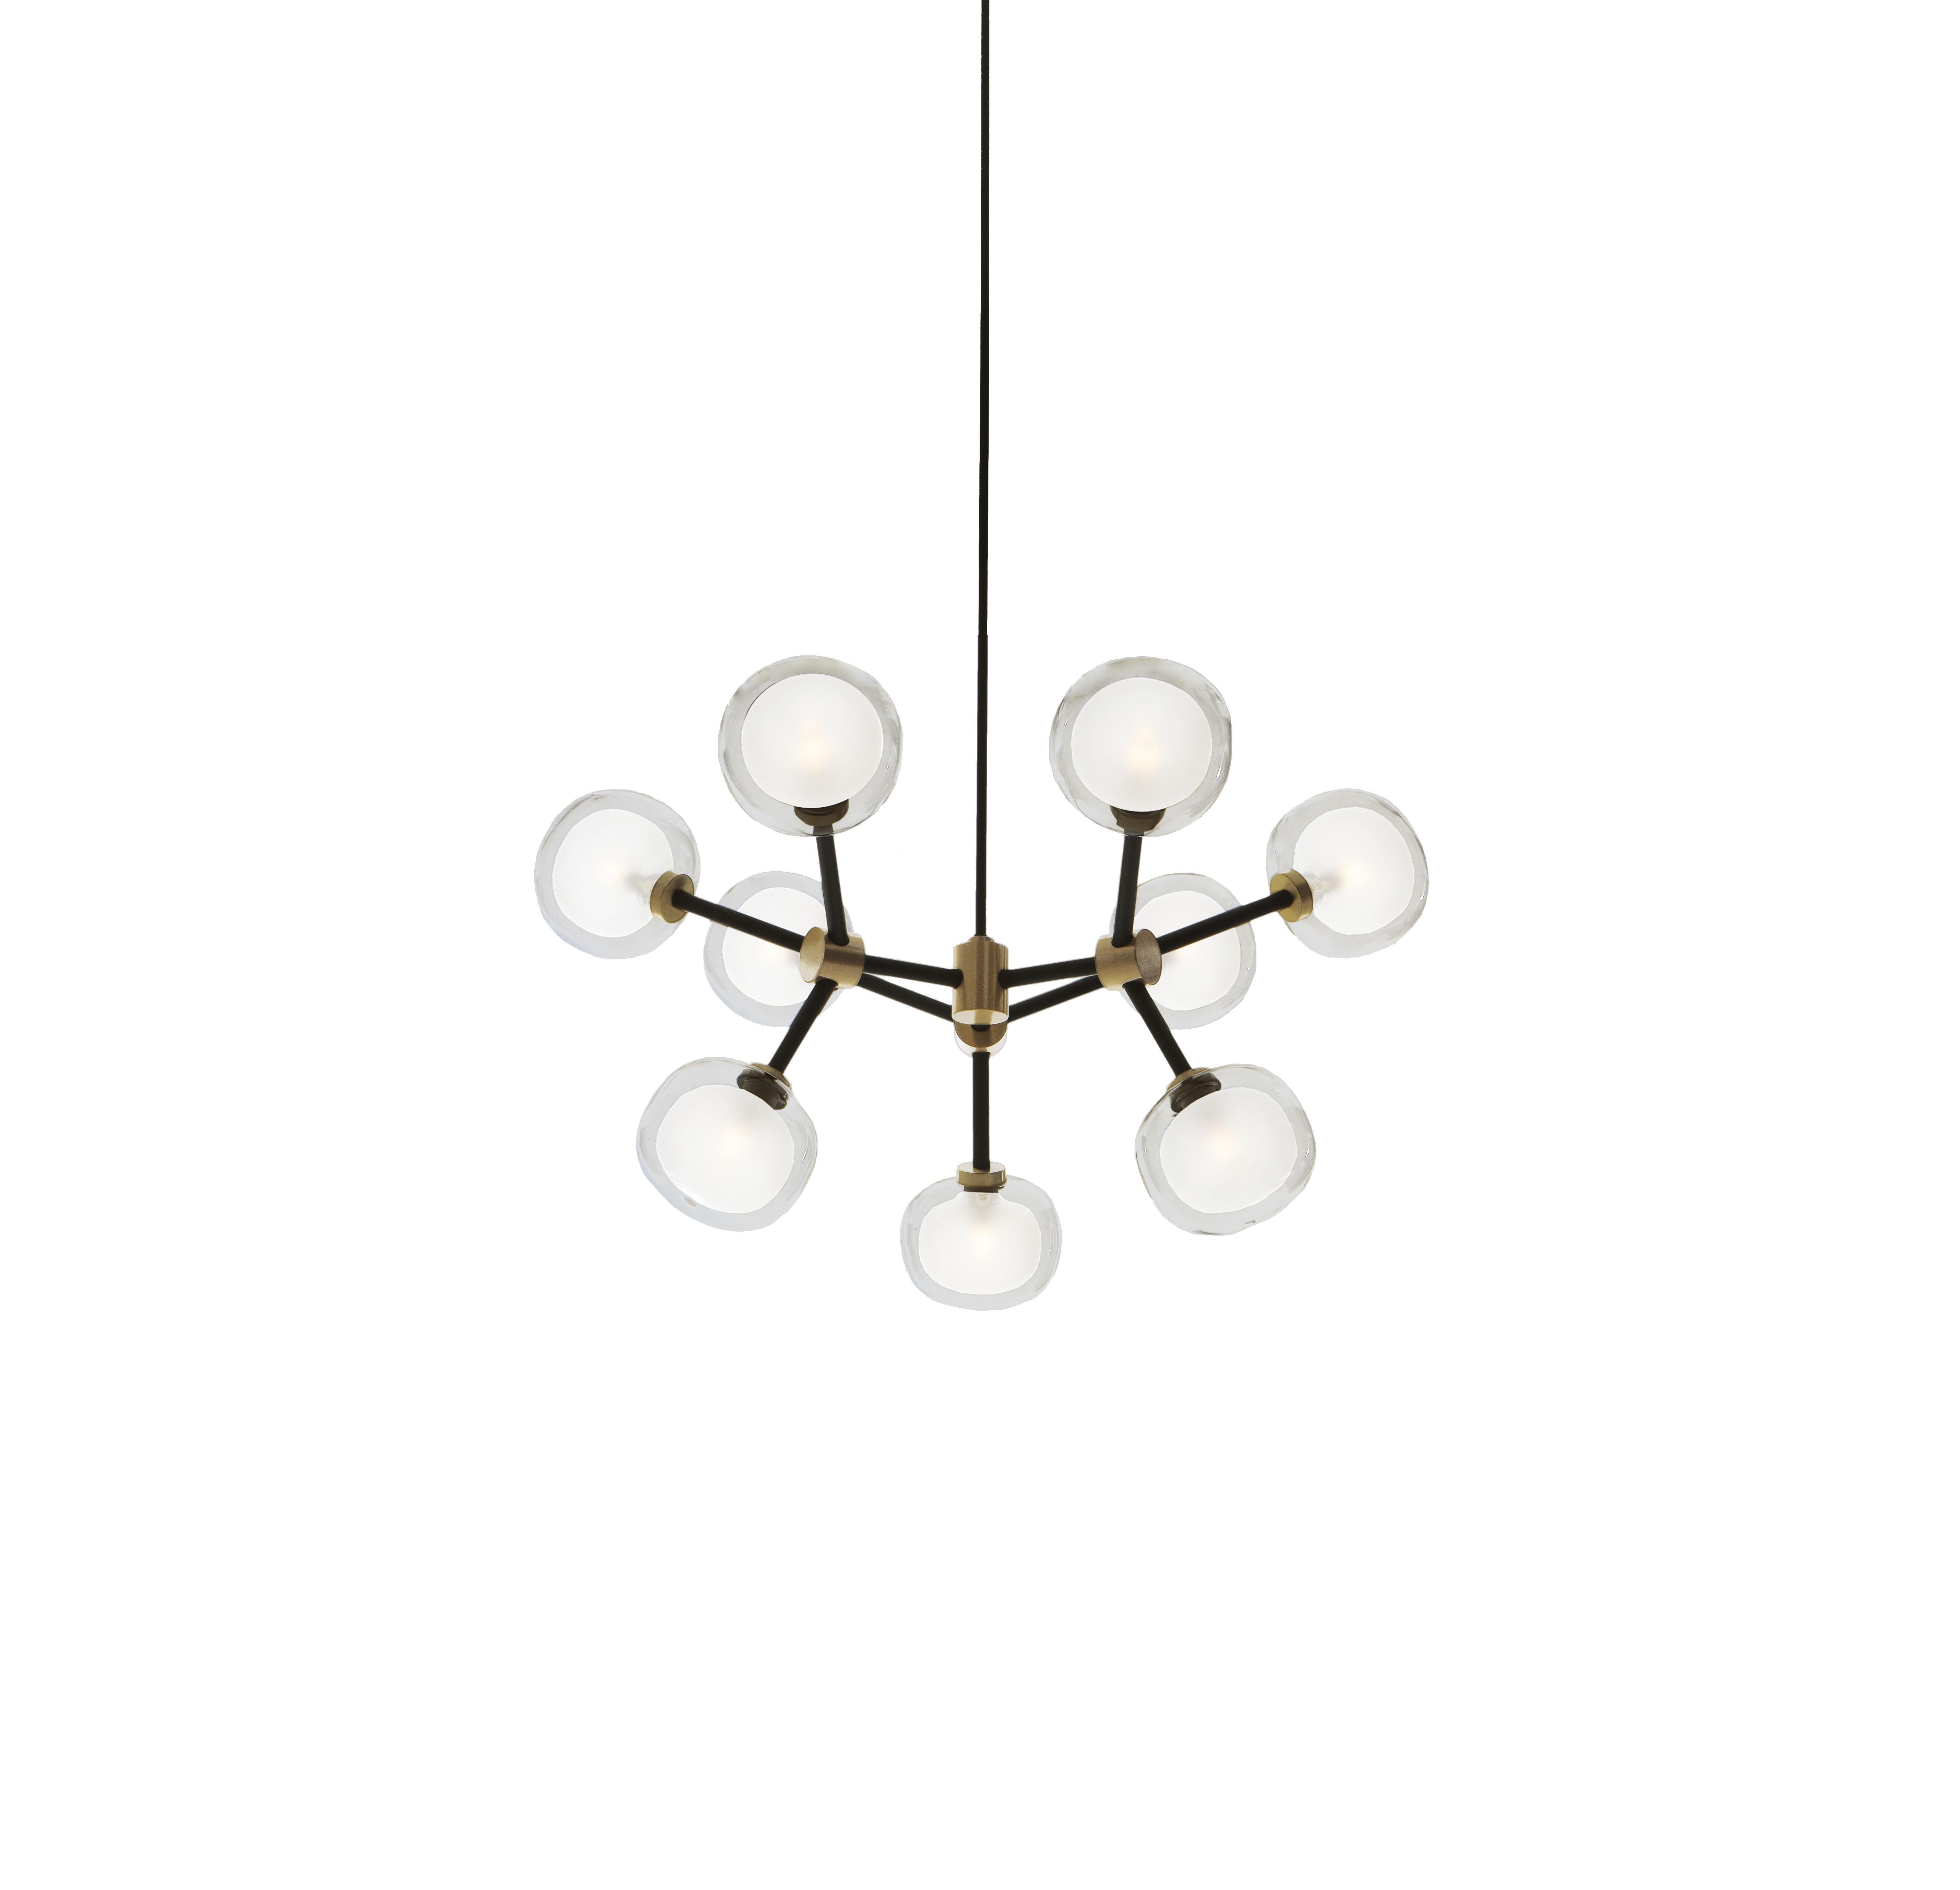 Brushed Contemporary Chandelier 'Nabila 552.19' by Tooy, Black Chrome, Smoked Glass For Sale